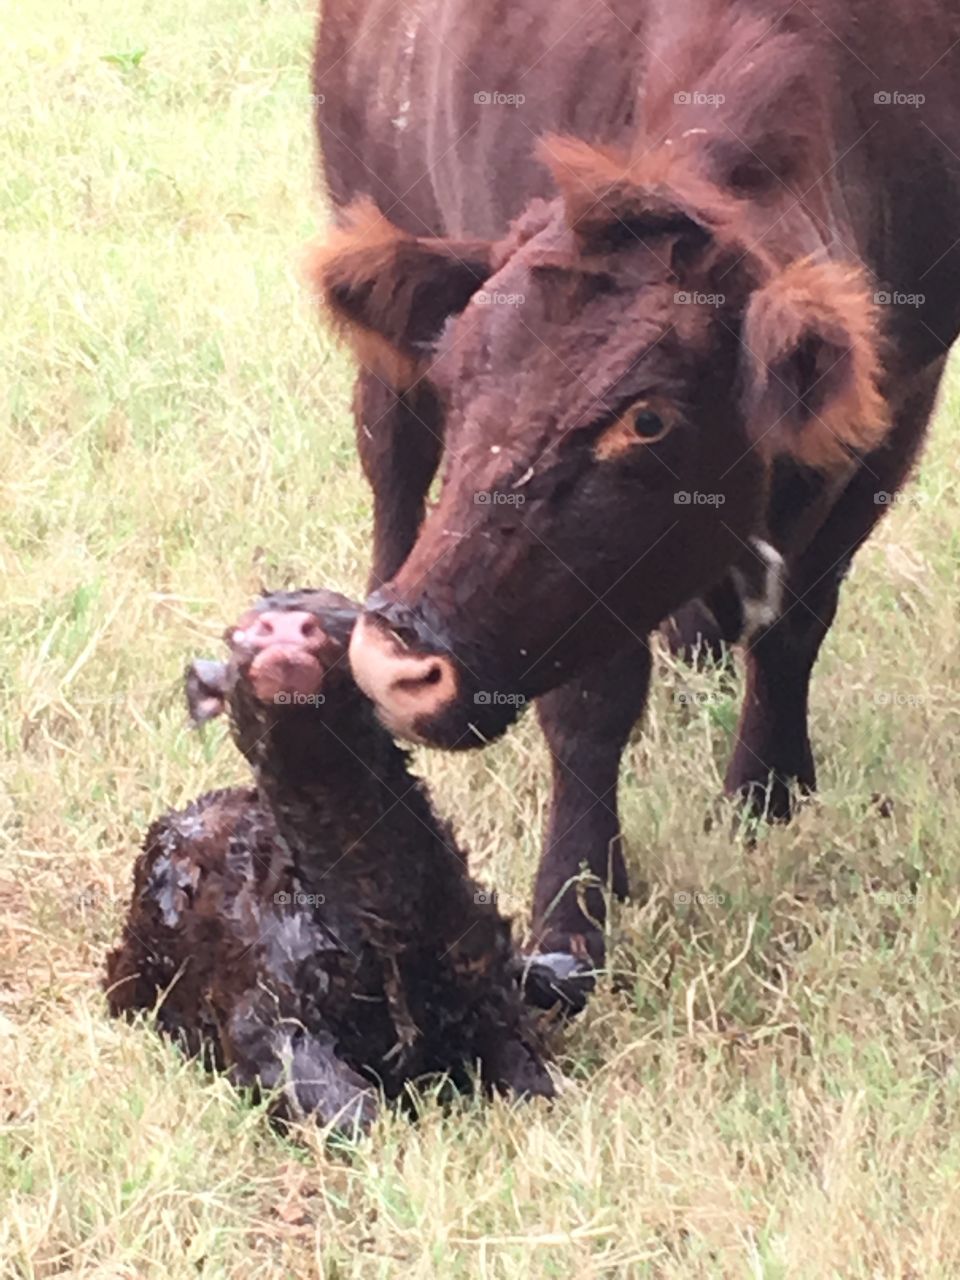 Baby shorthorn calf that was just born. 